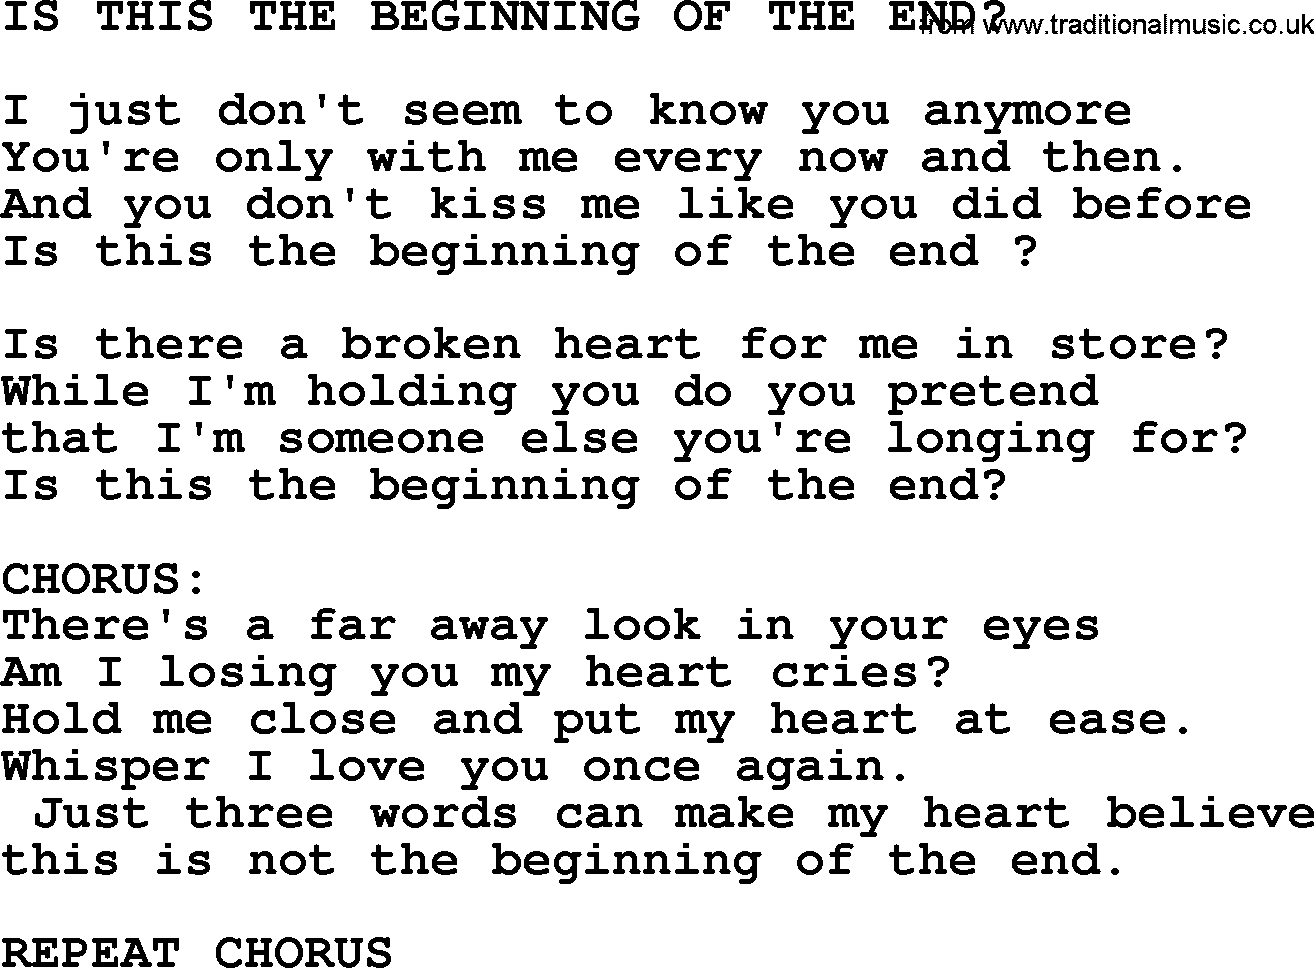 Merle Haggard song: Is This The Beginning Of The End_, lyrics.